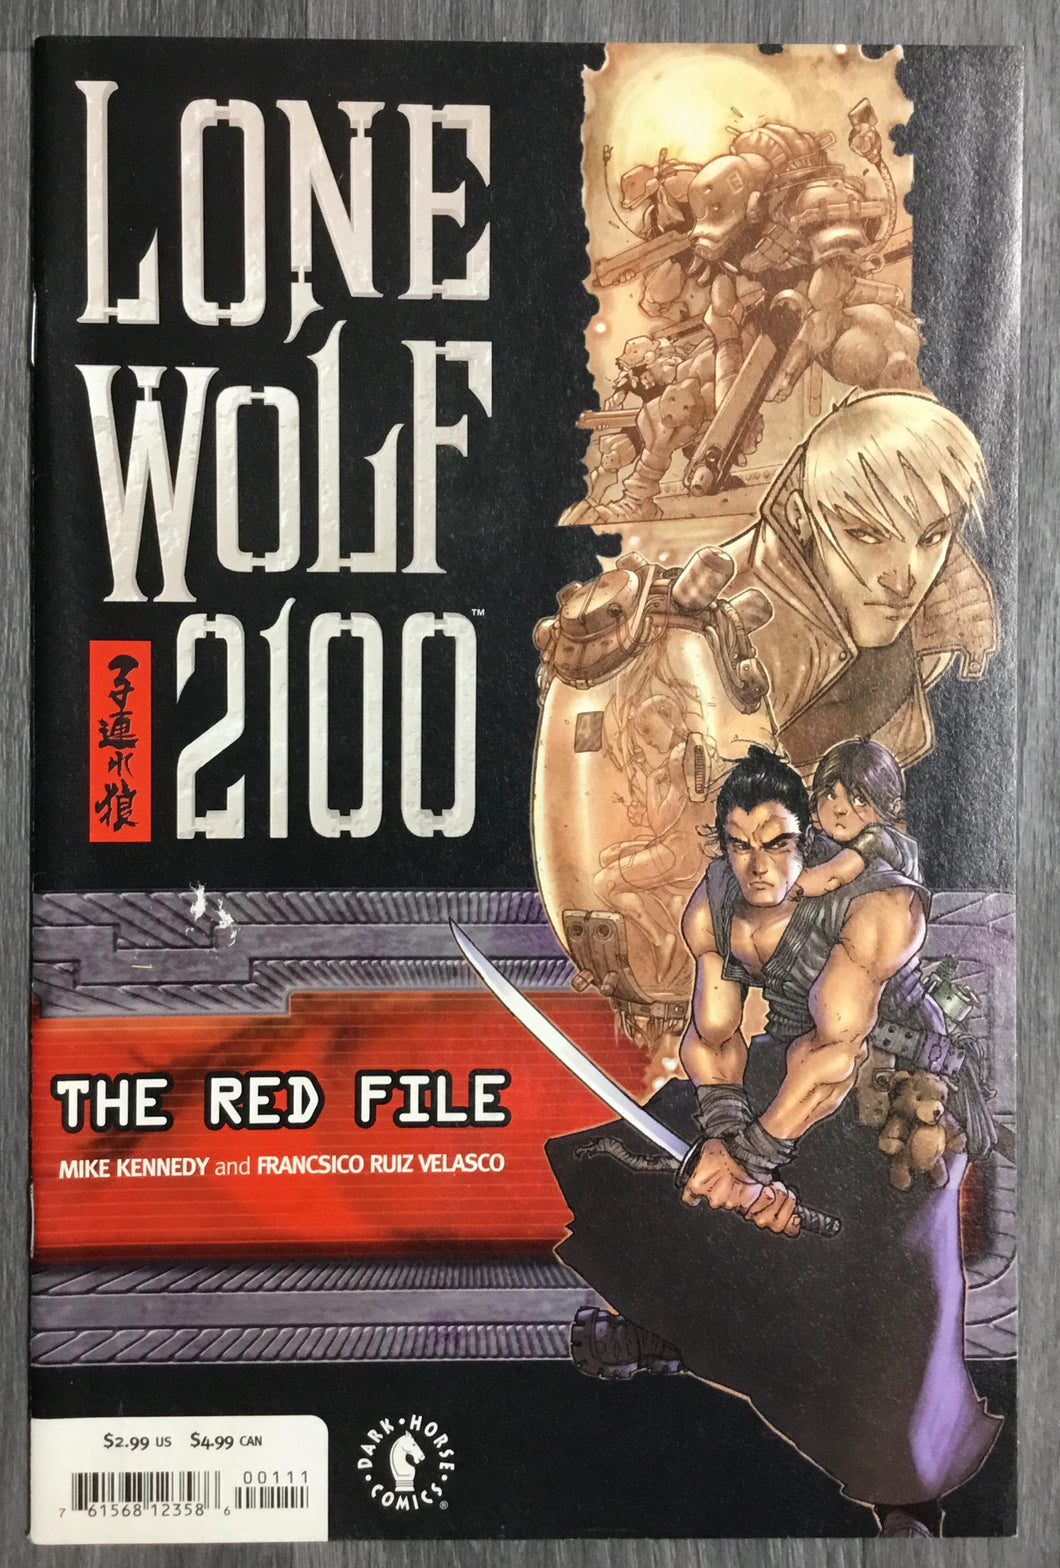 Lone Wolf 2100: The Red File 2003 Dark Horse Comics